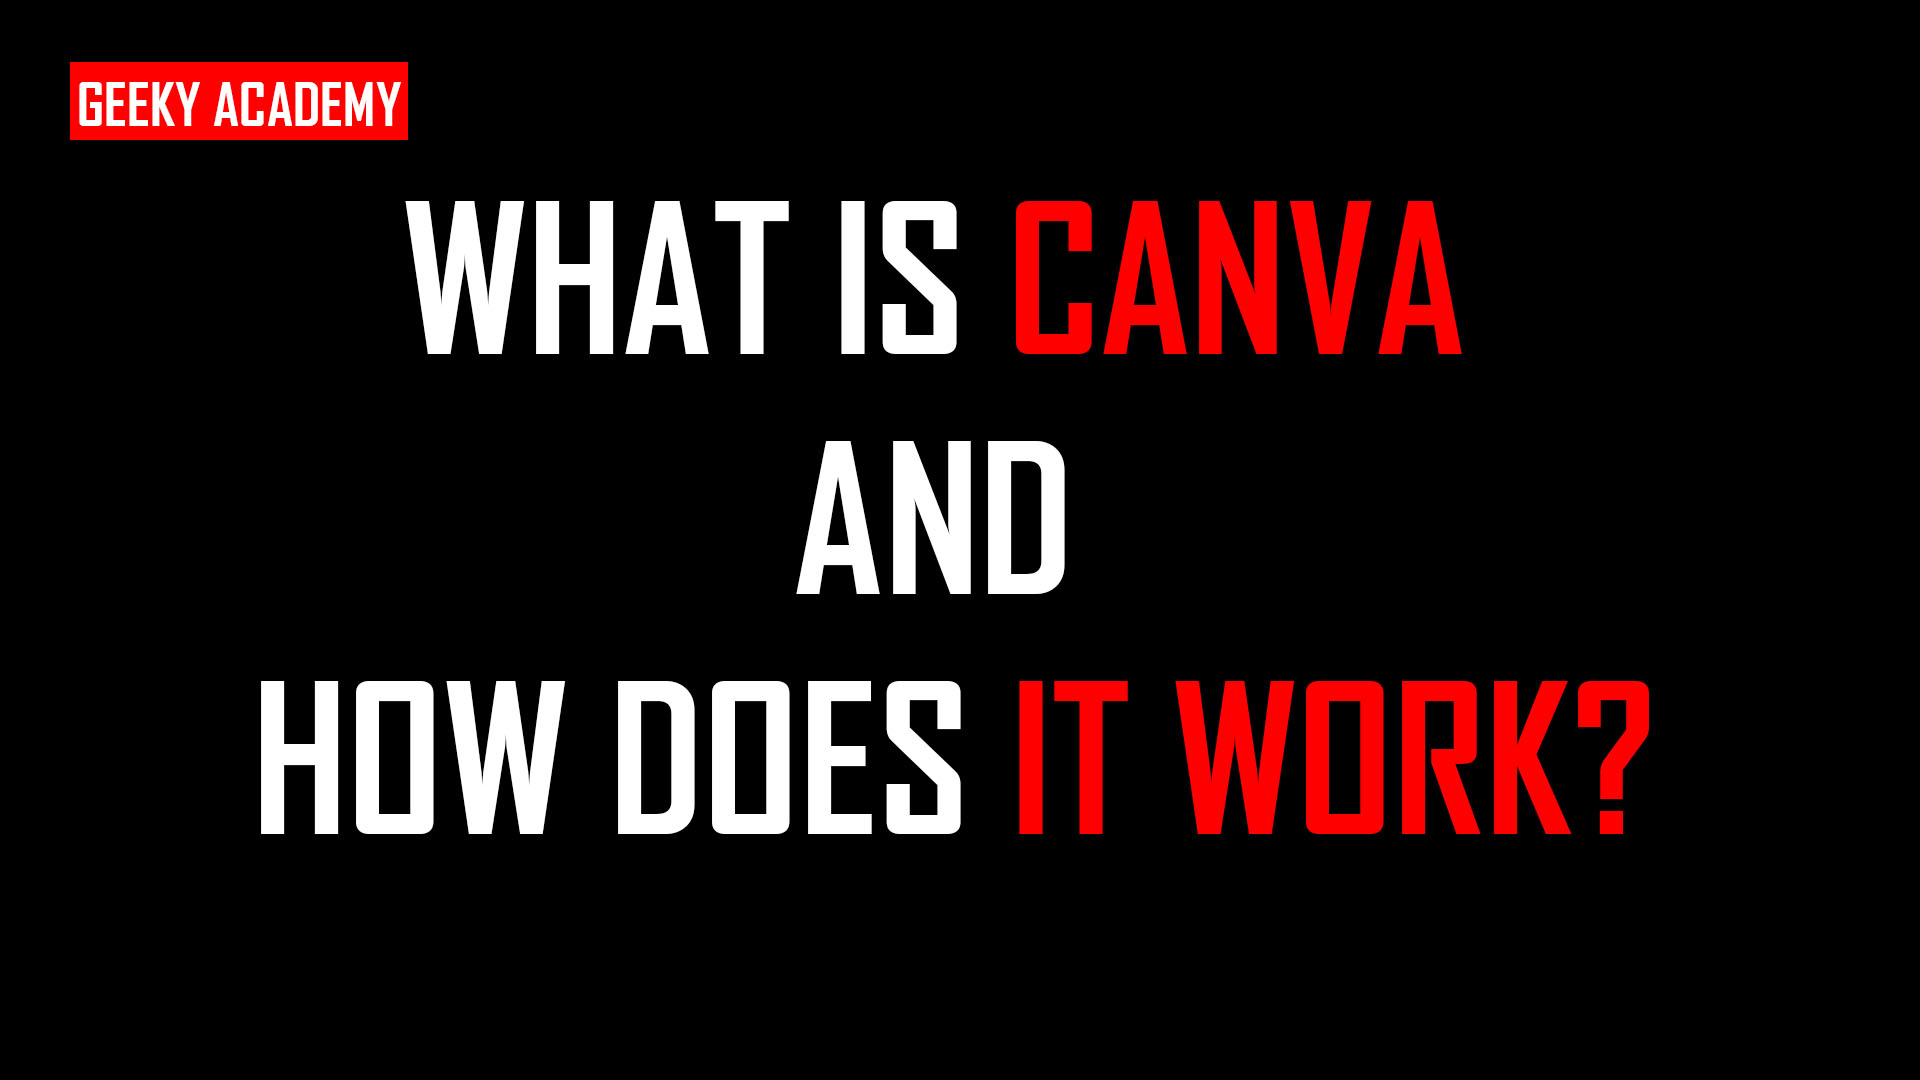 What is Canva and How does it work